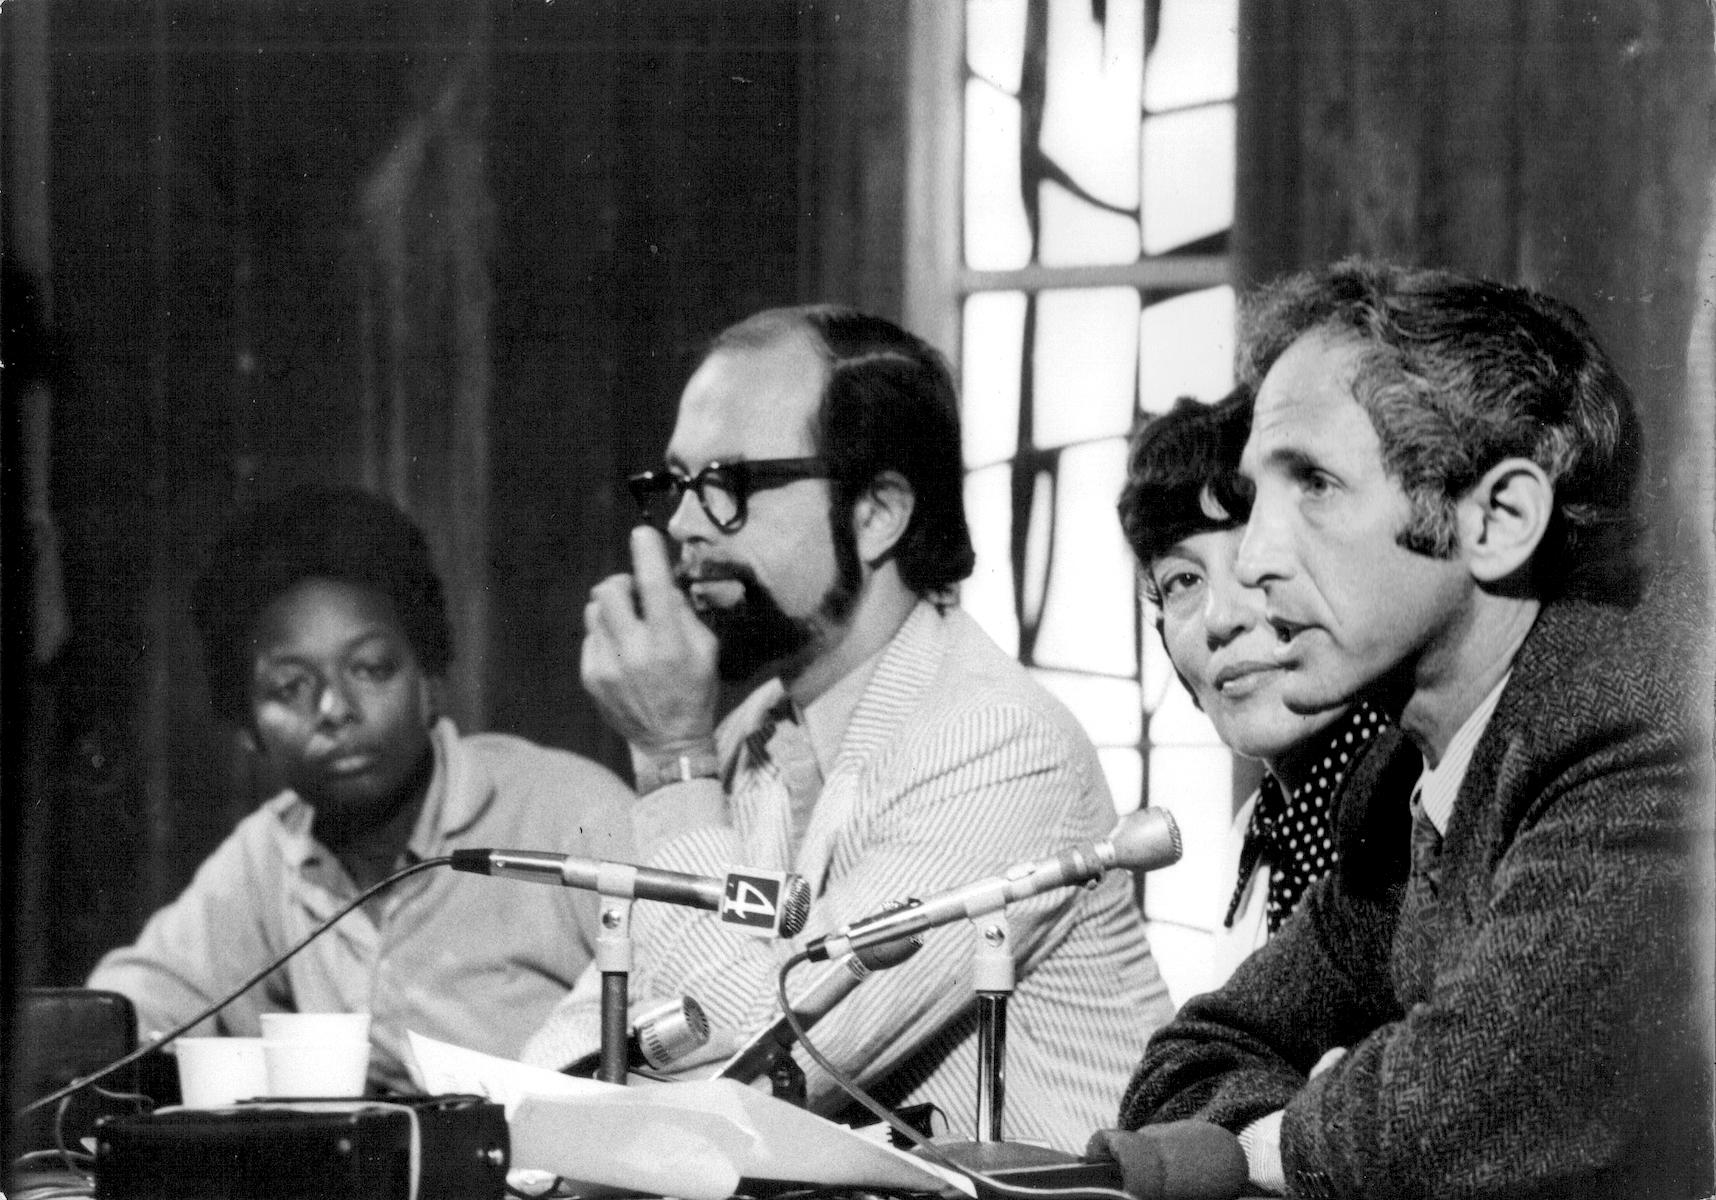 (L-R): Mandy Carter, David McReynolds, Irma Zigas, and Daniel Ellsberg during a press conference at the San Francisco International Airport; August 3, 1973; San Francisco, CA. Photo Credit: Nancy Purser. Mandy shares, “This was prior to Ellsberg doing a workshop on the Pentagon Papers at the War Resisters League 50th Anniversary Conference in 1973.” Photo courtesy of Mandy Carter.